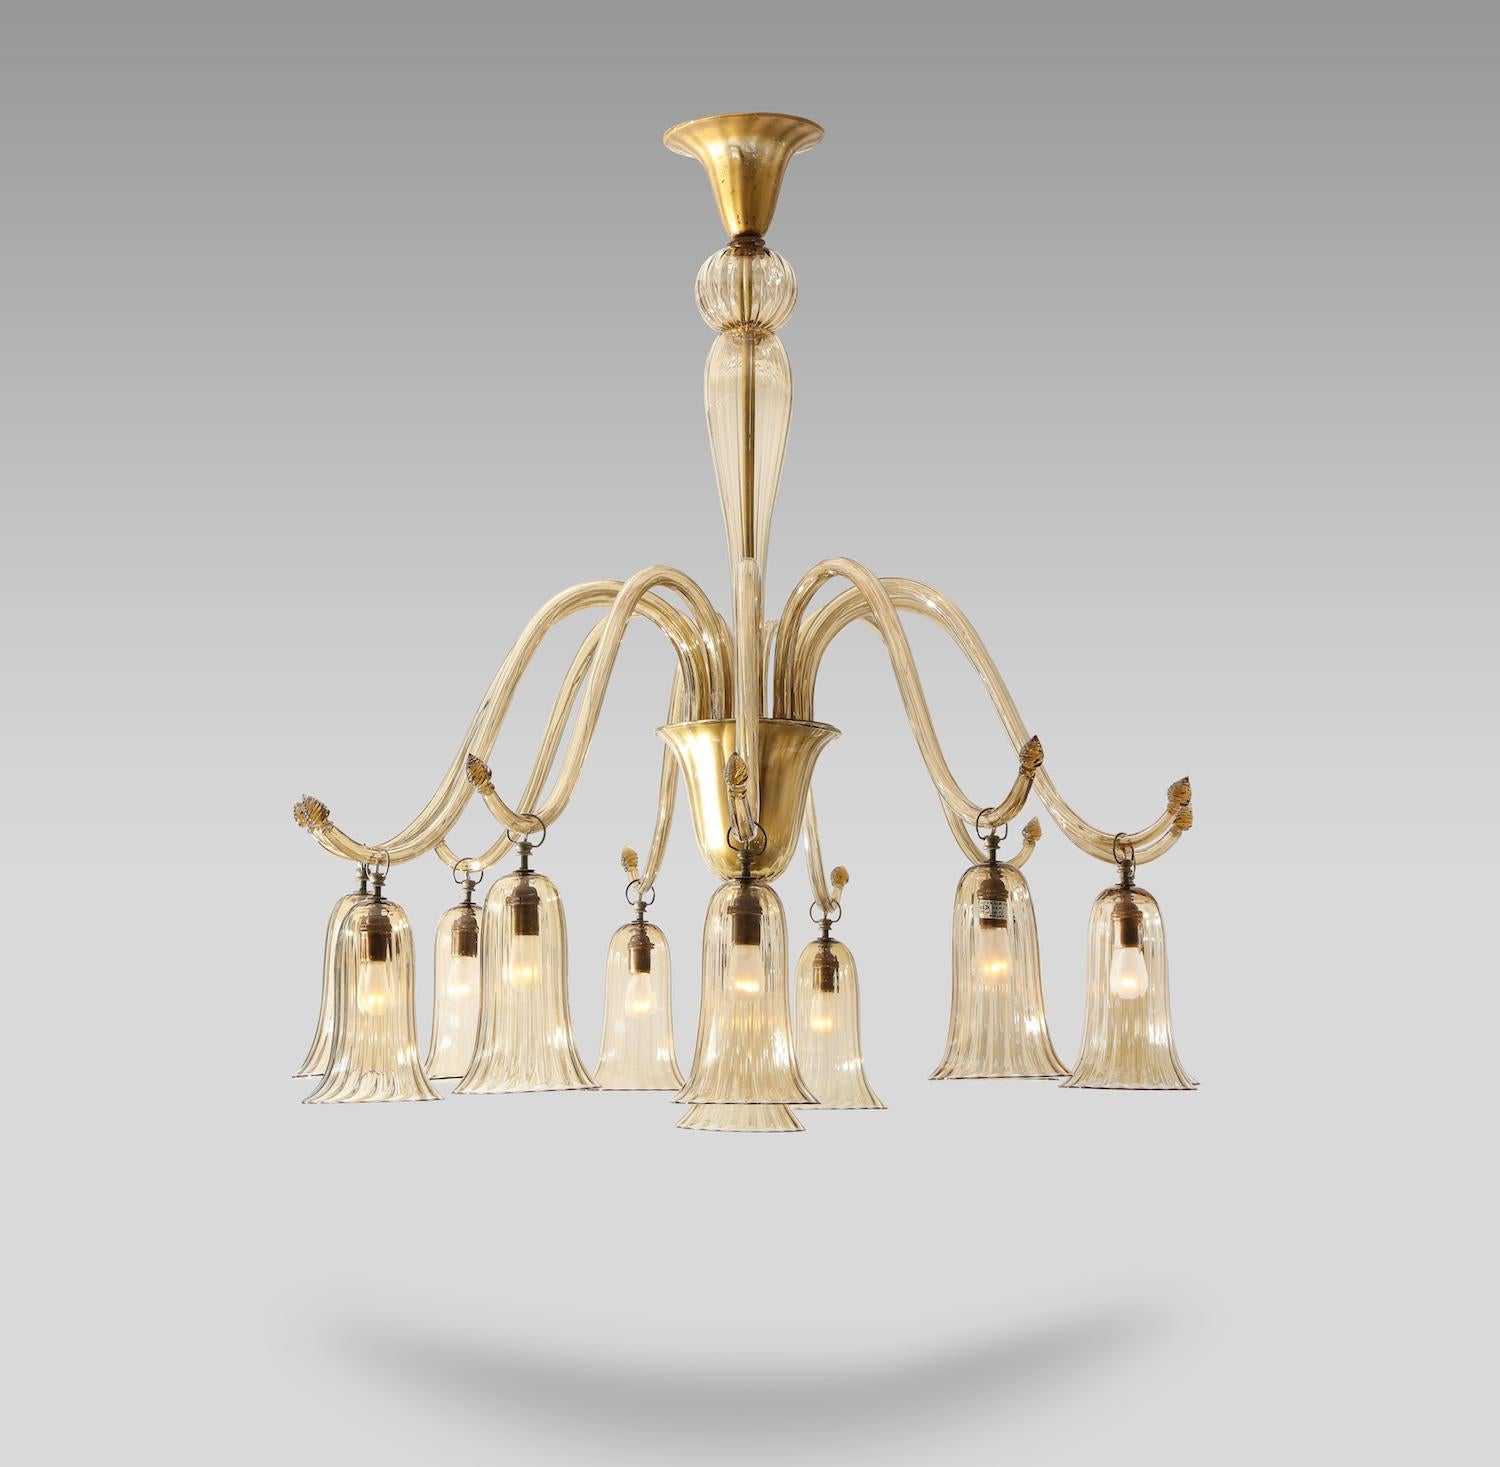 12-light chandelier #2073 by Napoleone Martinuzzi for Venini. Extraordinary example of an early and large Martinuzzi form. Comprised of hand-blown glass and a metal structure. Each of the 11 arms ends with one hanging glass shade surrounding a